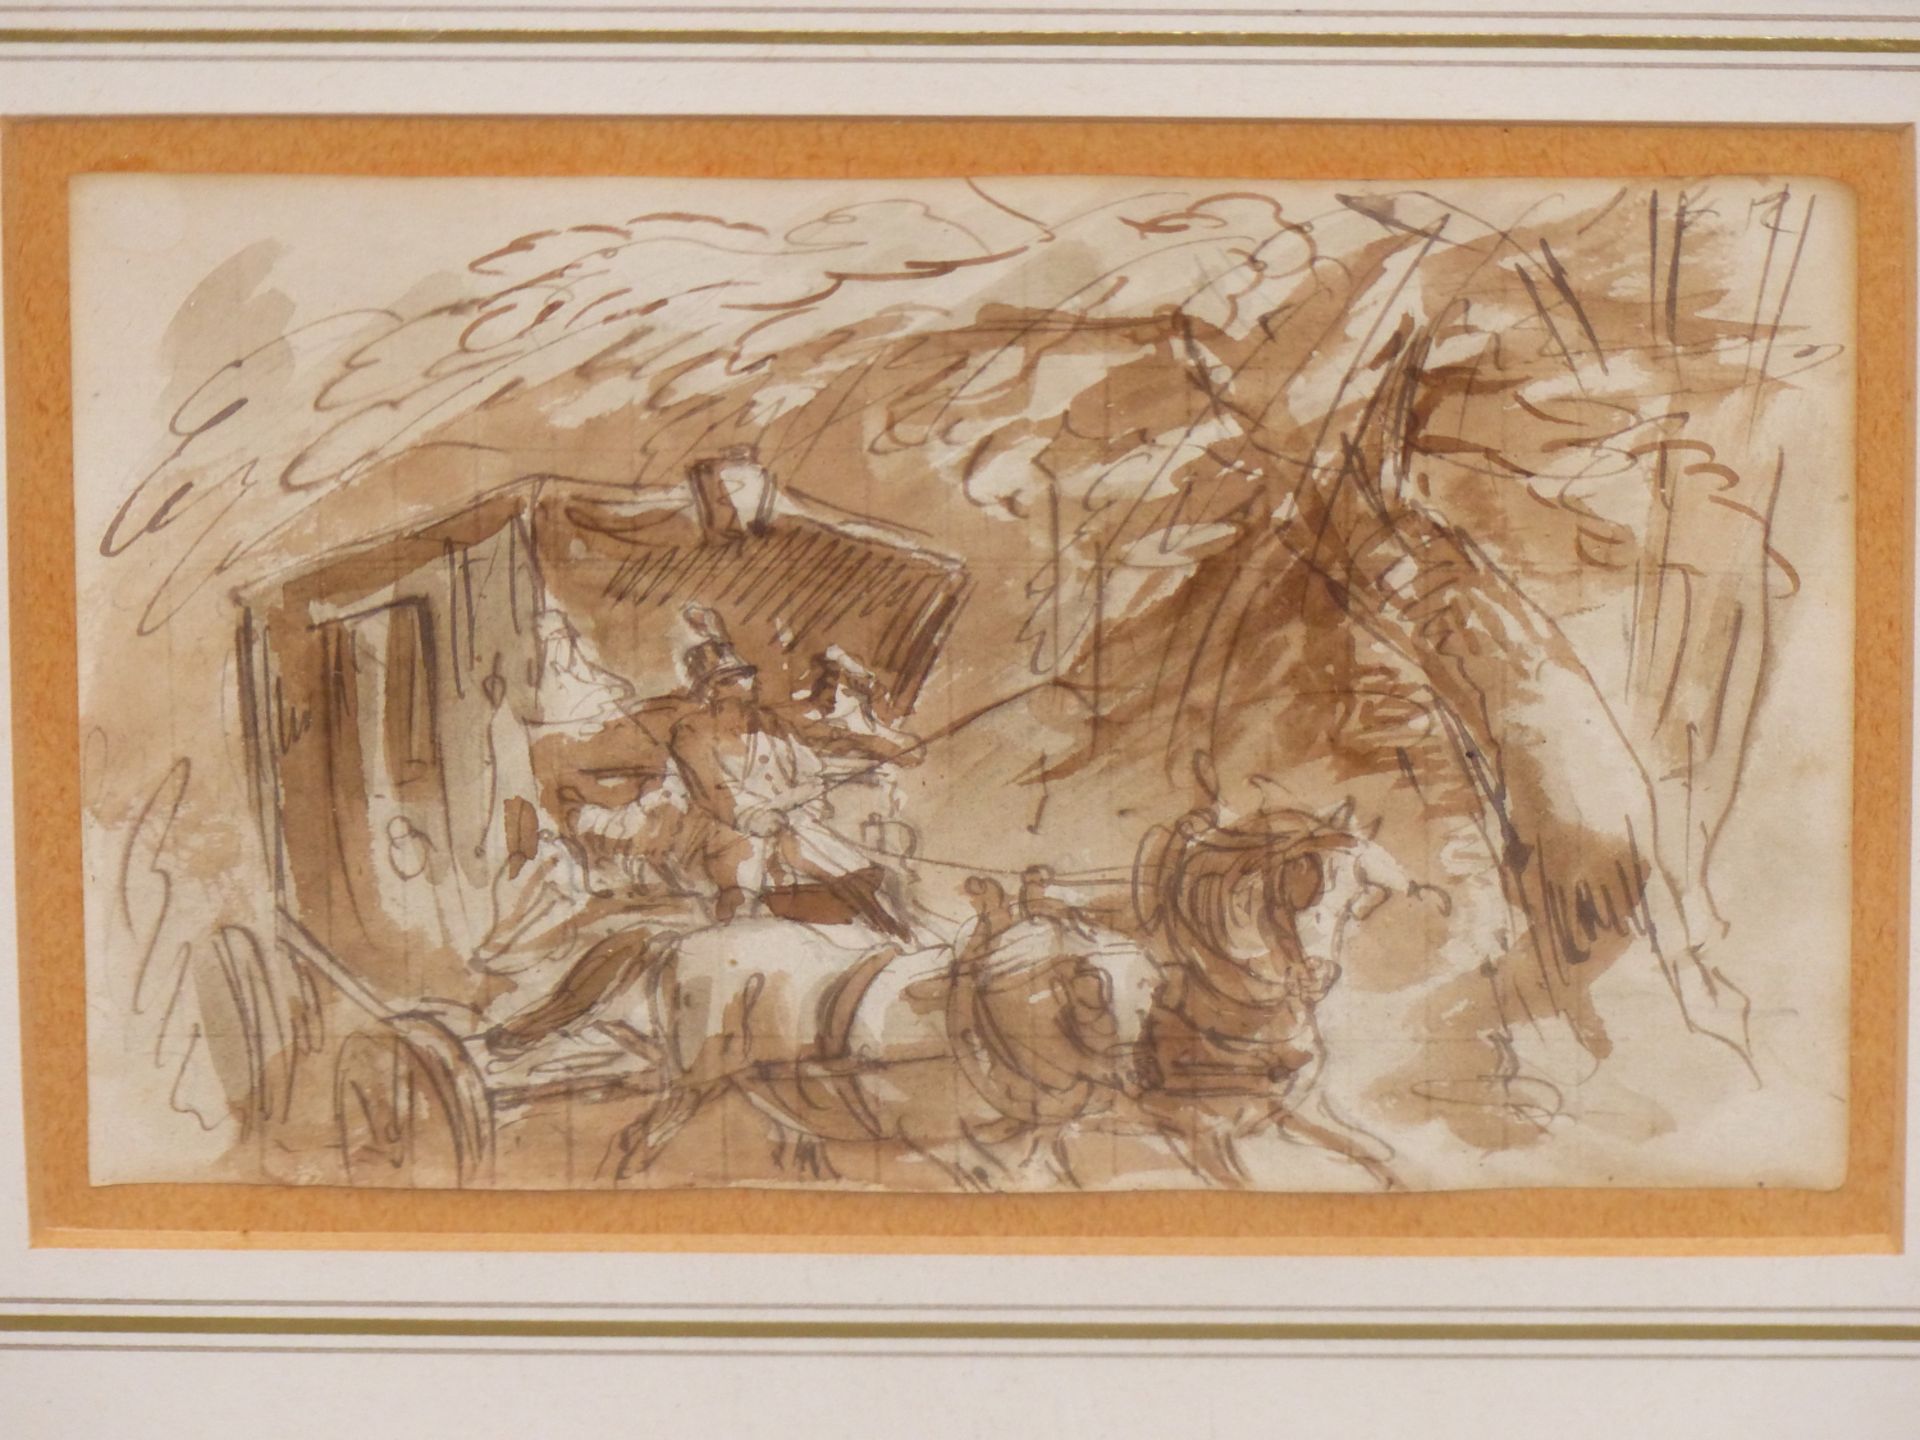 18TH CENTURY ENGLISH SCHOOL. A BROWN WASH STUDY OF A HORSE DRAWN CARRIAGE AT SPEED. 16 X 10 cm. - Image 2 of 4